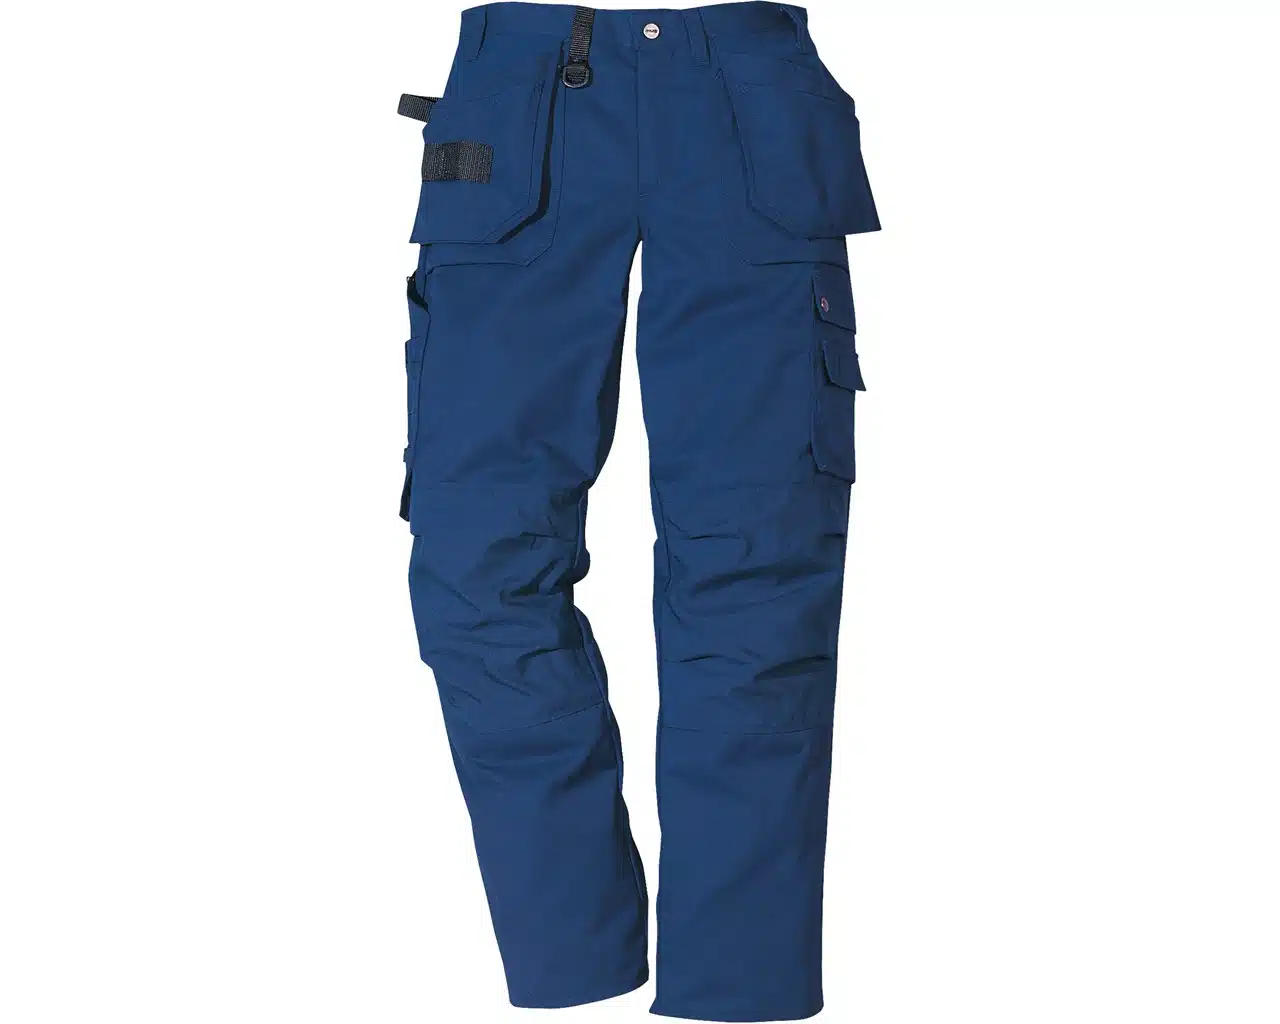 Fristads 100544 Craftsman Trousers 241 PS25-NAVY-D116